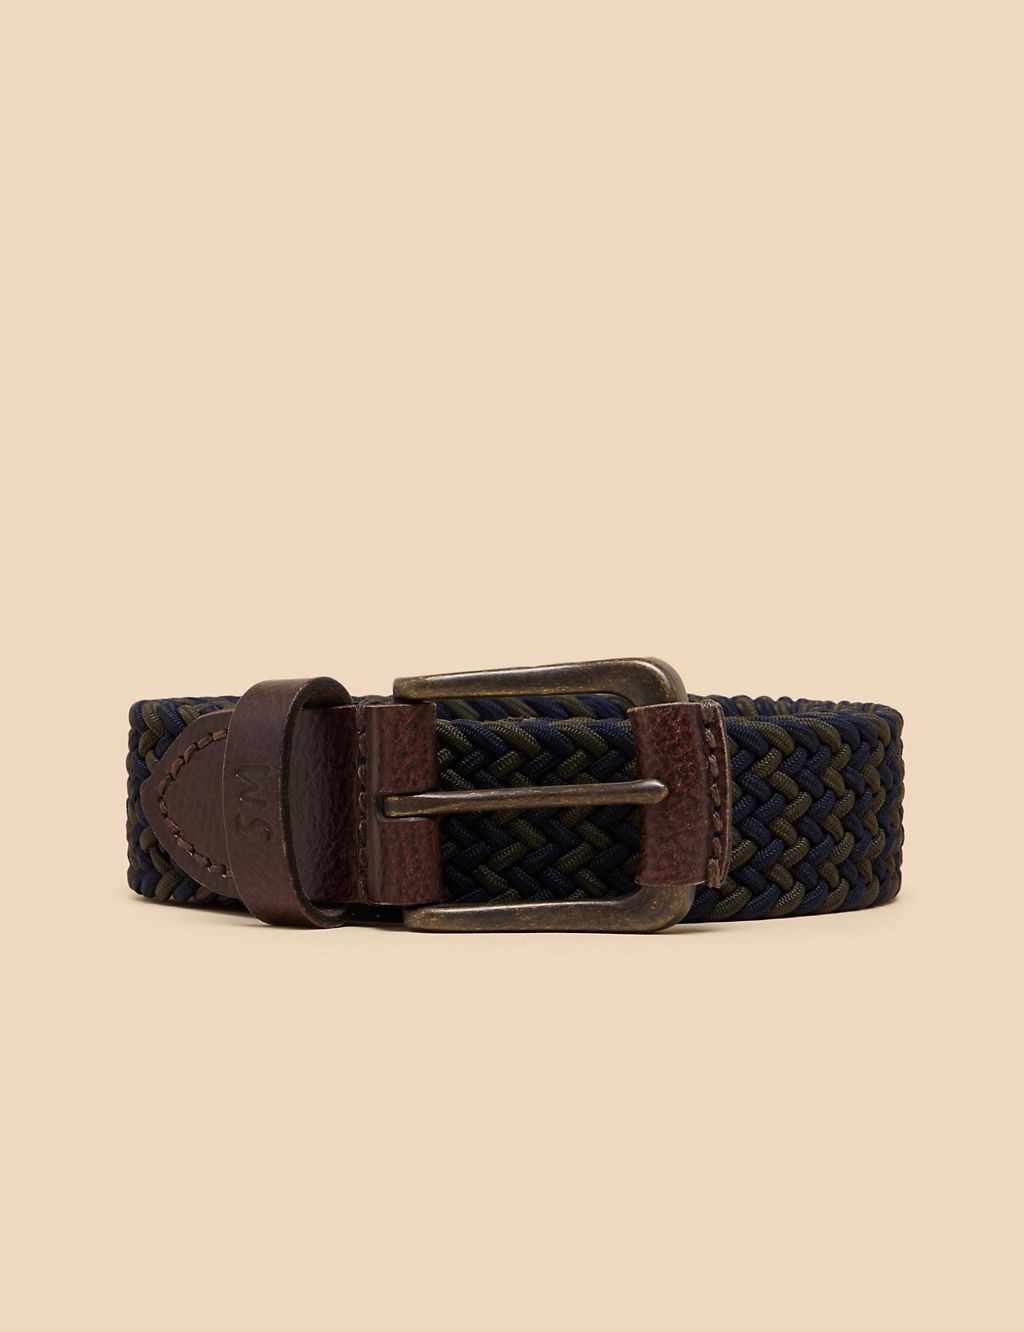 Woven Elasticated Jeans Belt 1 of 3